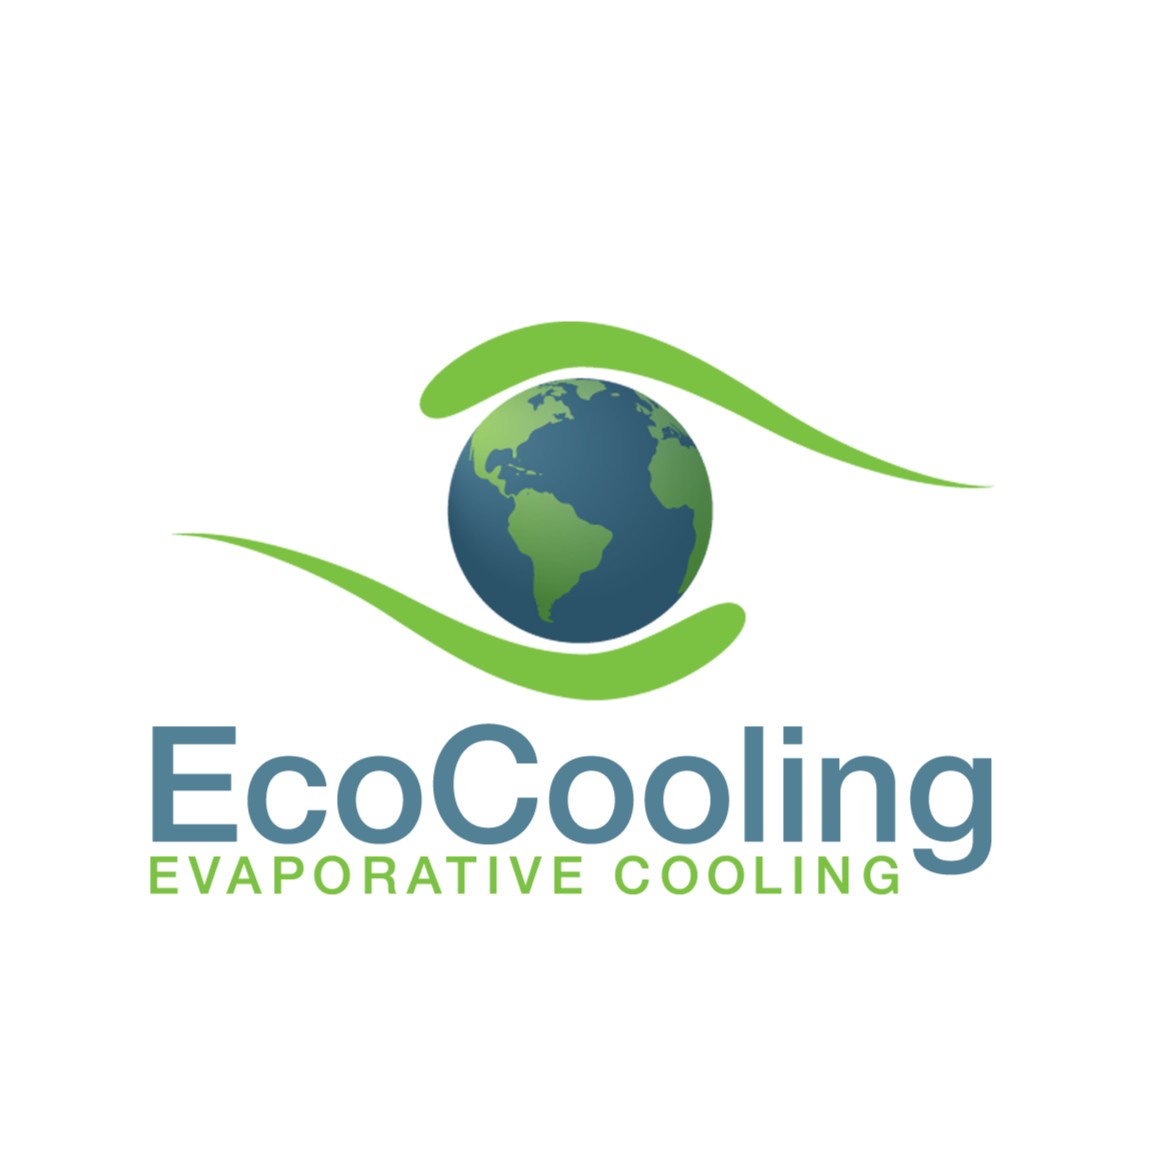 HIVE Blockchain Partner with Ecocooling